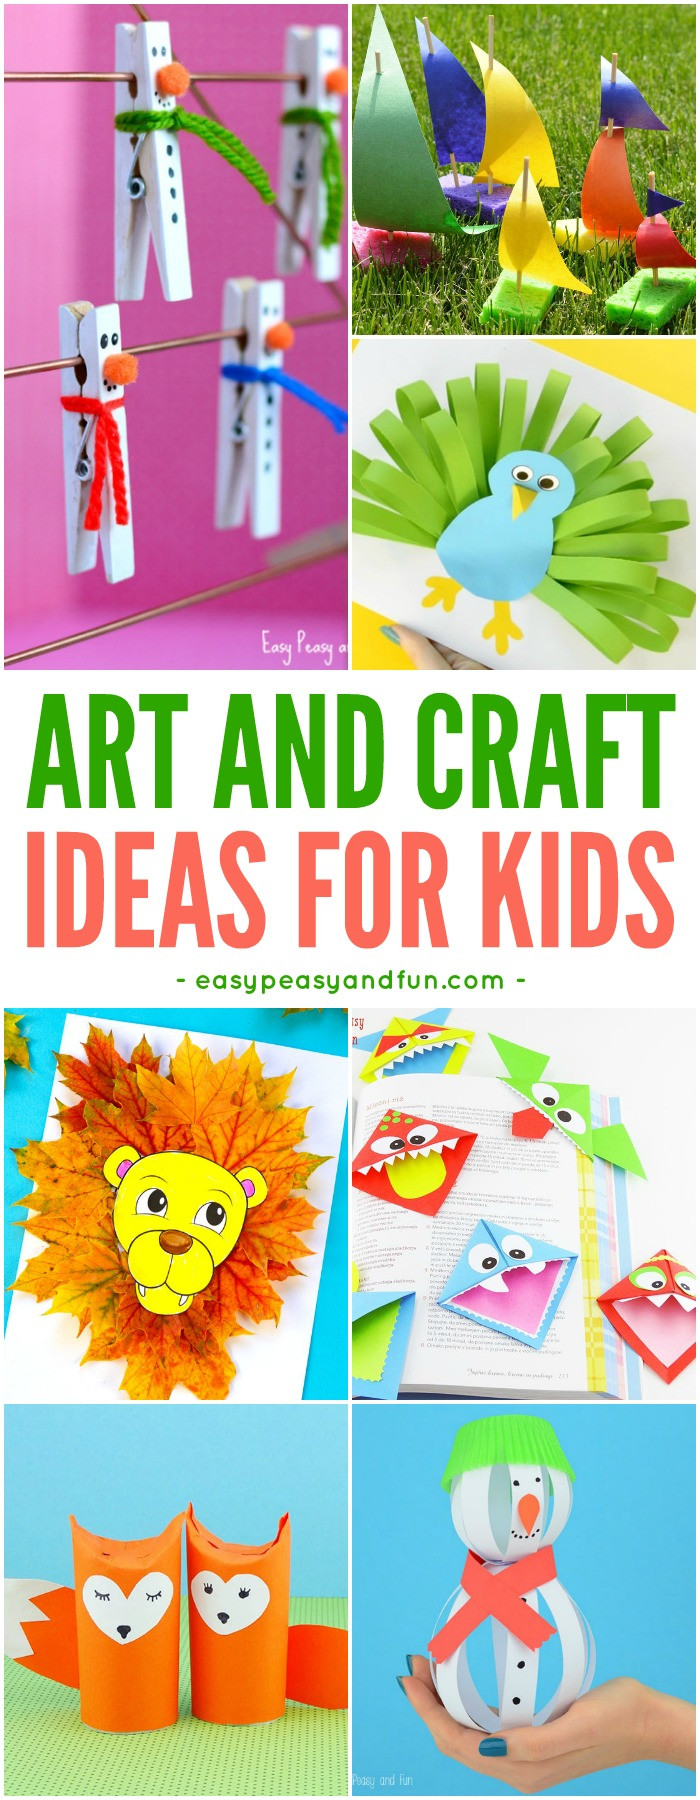 Arts And Crafts Easy Ideas For Kids
 Crafts For Kids Tons of Art and Craft Ideas for Kids to